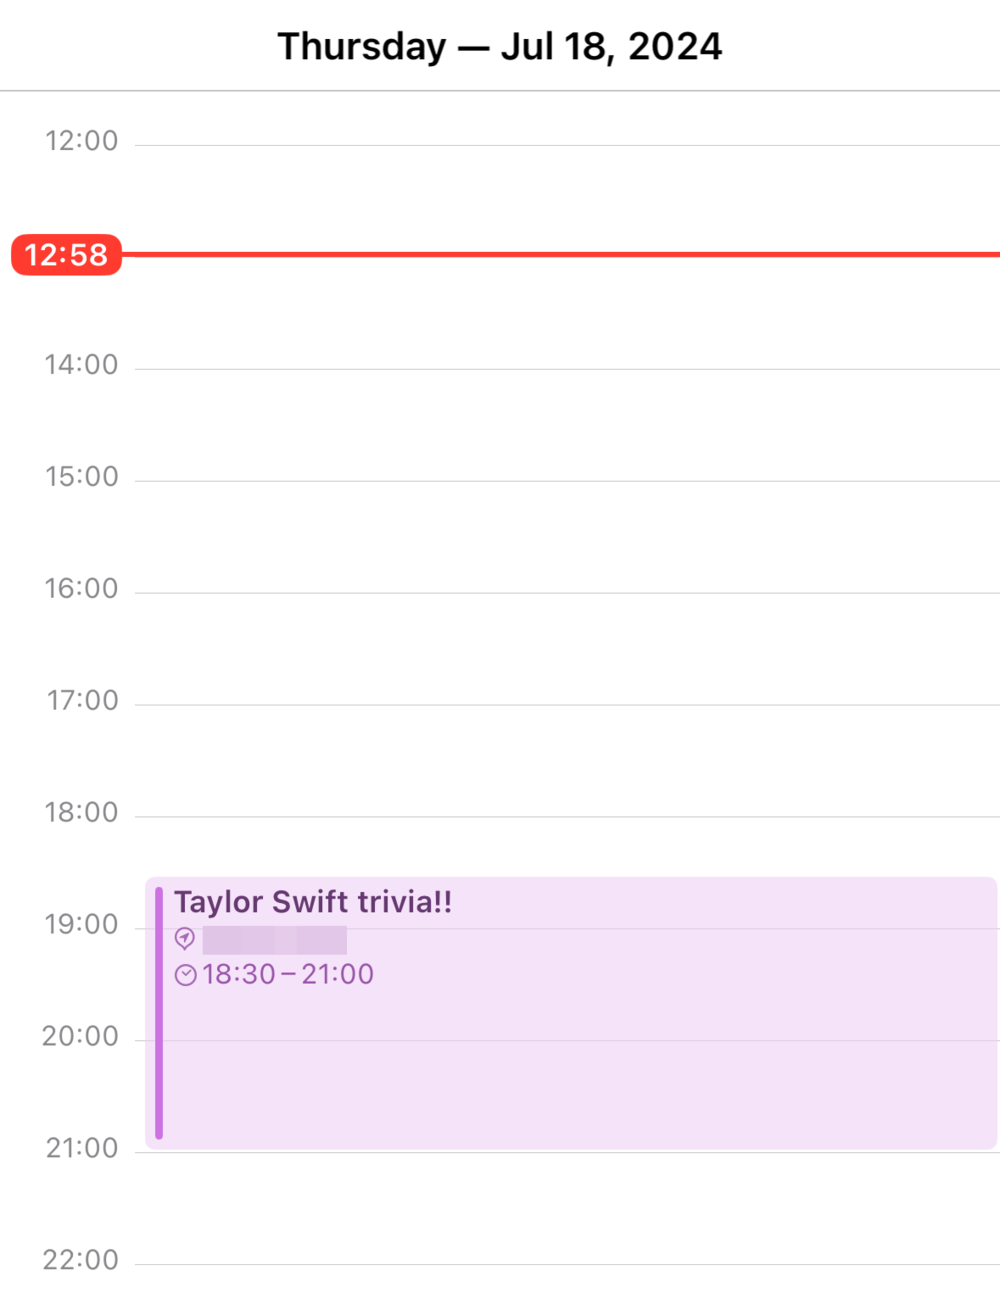 Taylor Swift trivia event in calendar marked for 18:30